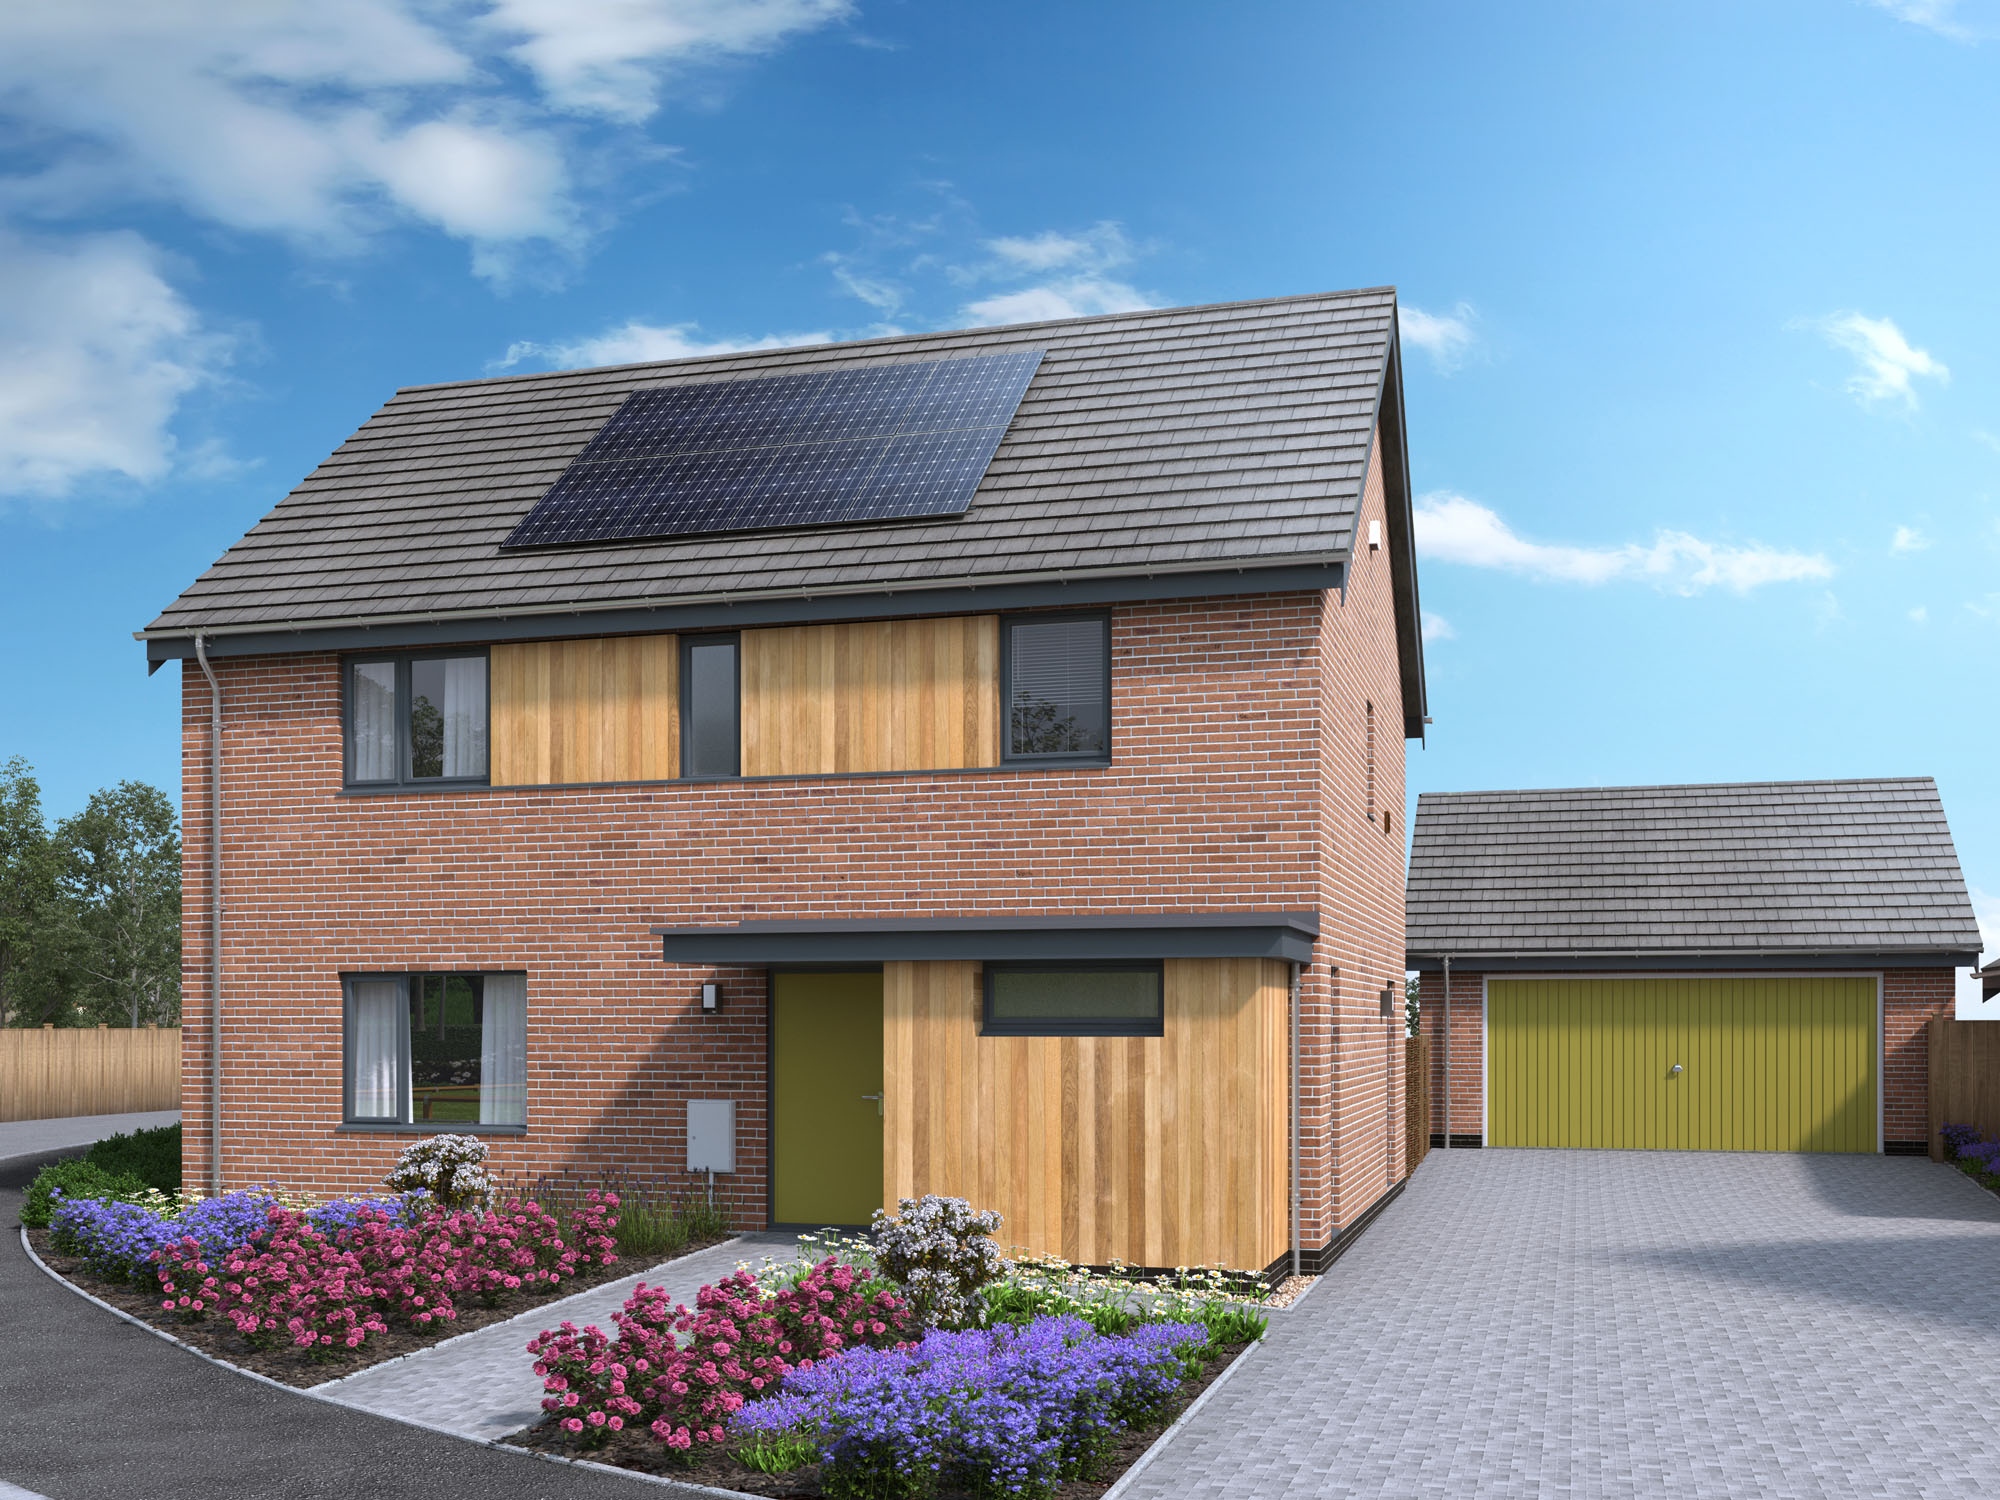 Plot 1 » A four bedroom detached home with a double garage